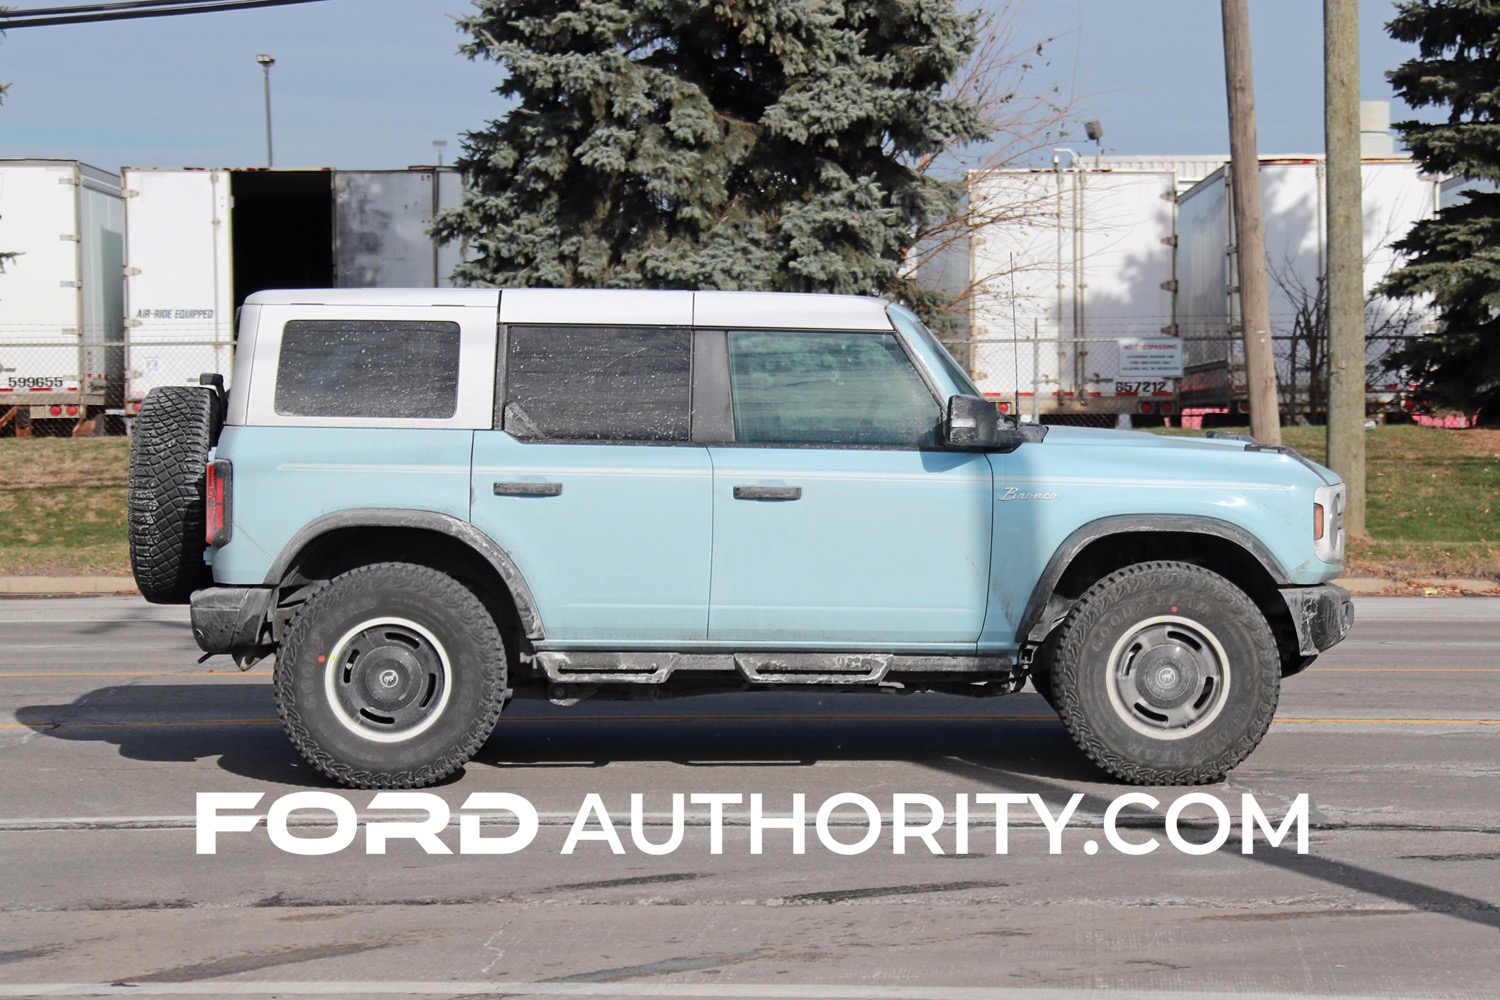 2023 Ford Bronco Heritage Limited Edition Four Door Robins Egg Blue Cw Black Wheels Real World Photos Exterior 005 Side 